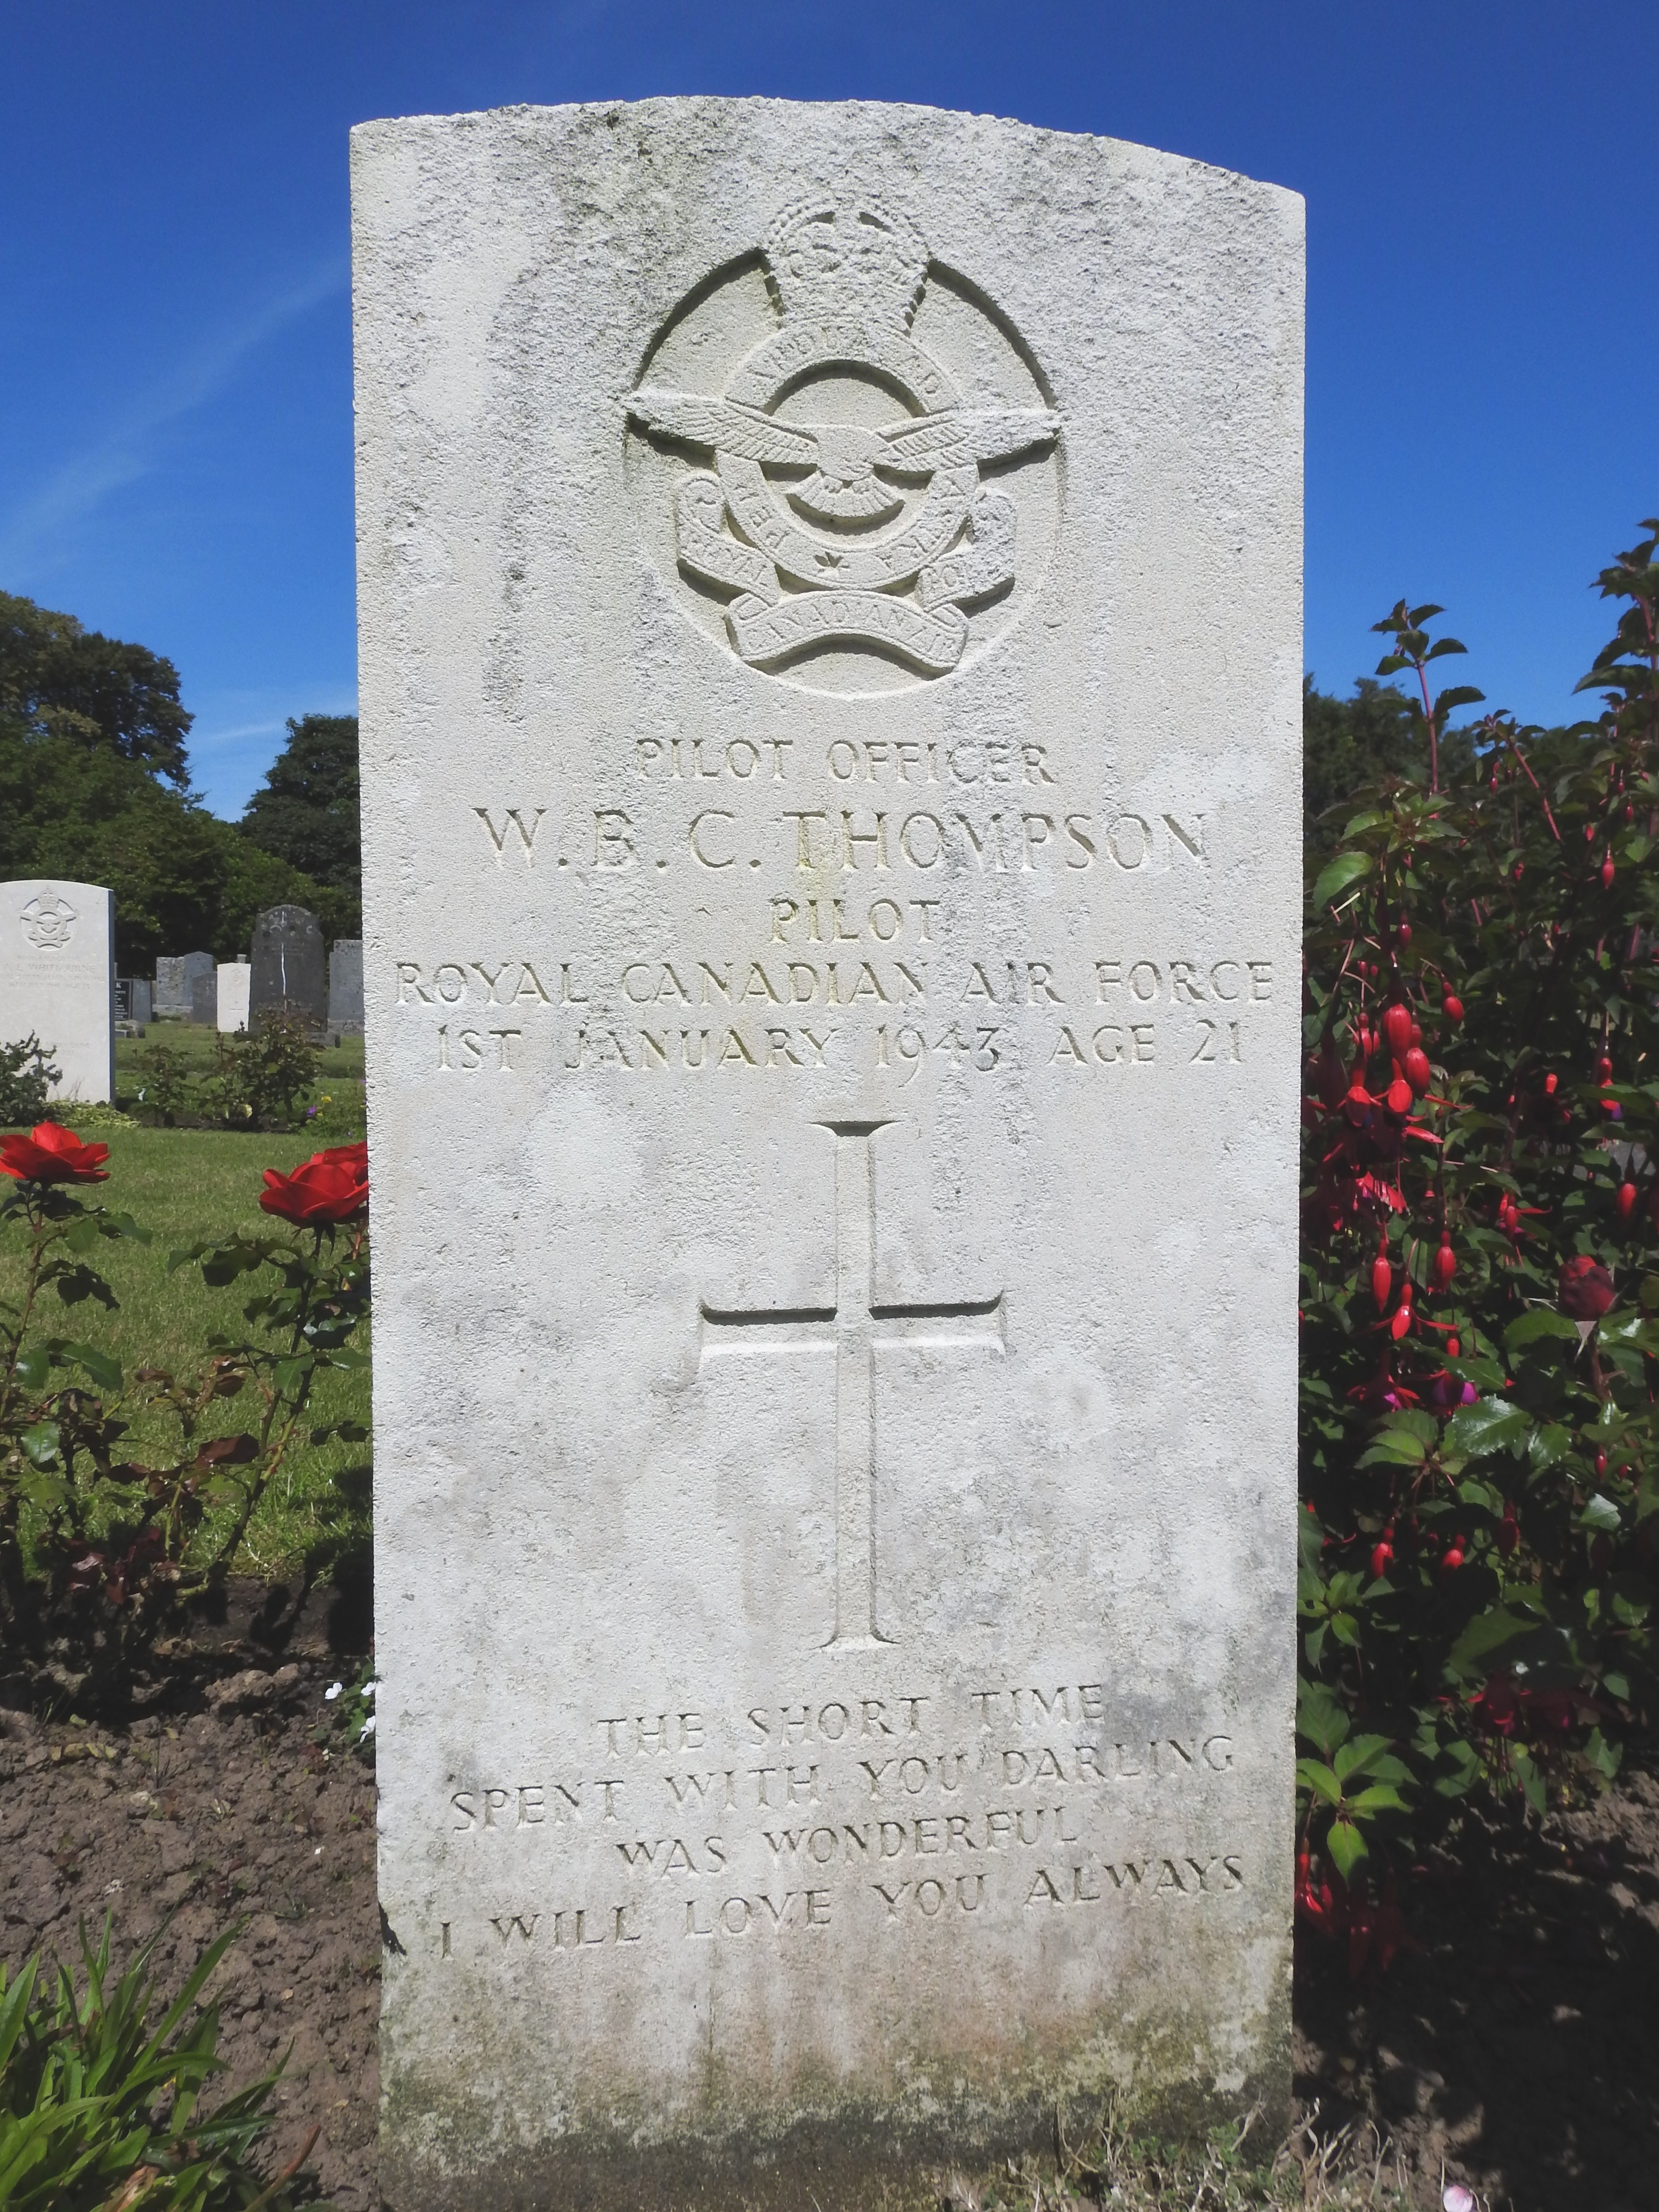 Canadian Fallen Soldier - Pilot Officer WILLIAM BASIL CHEALE THOMPSON